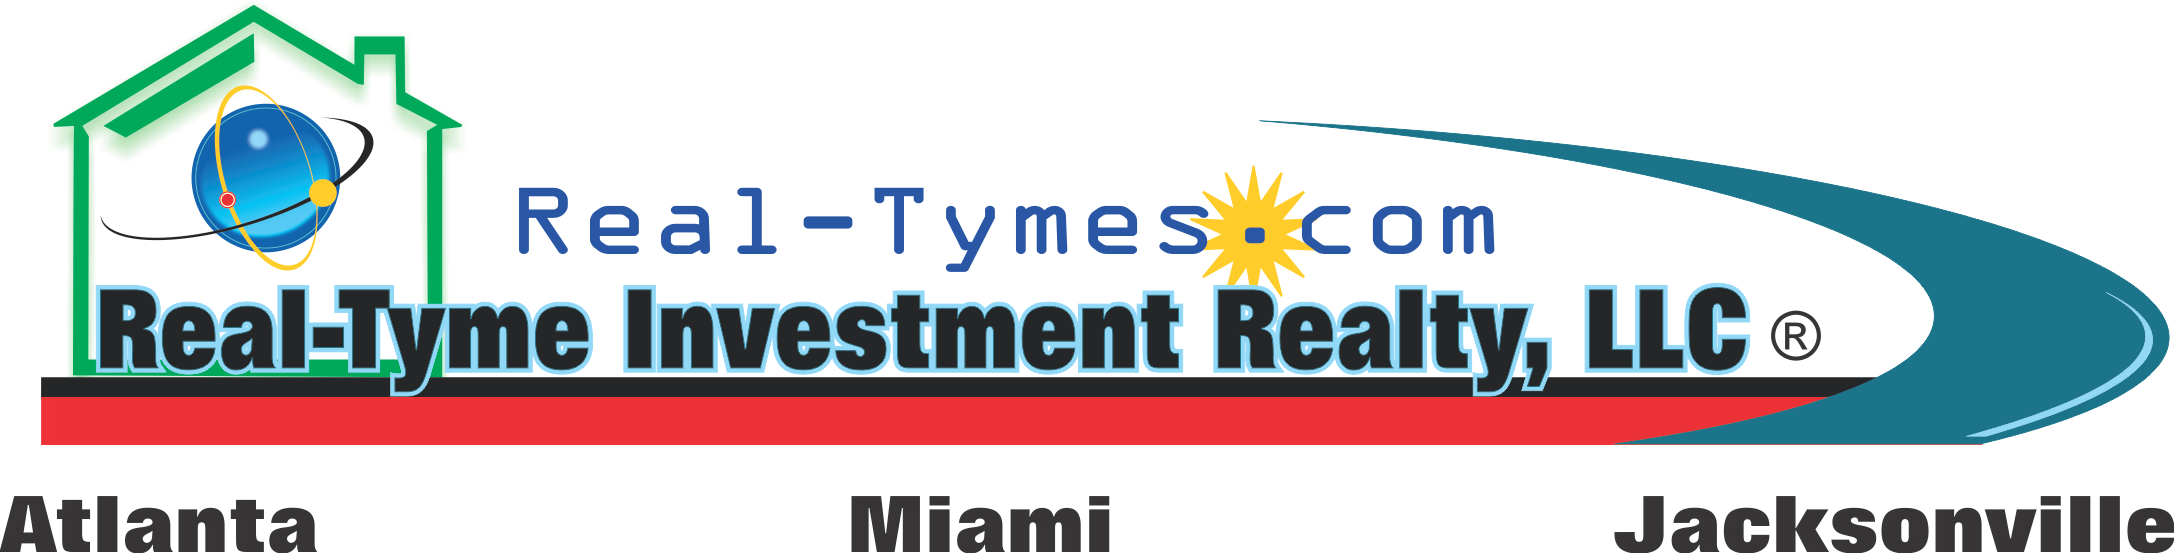 Real-Tyme Investment Realty, LLC.